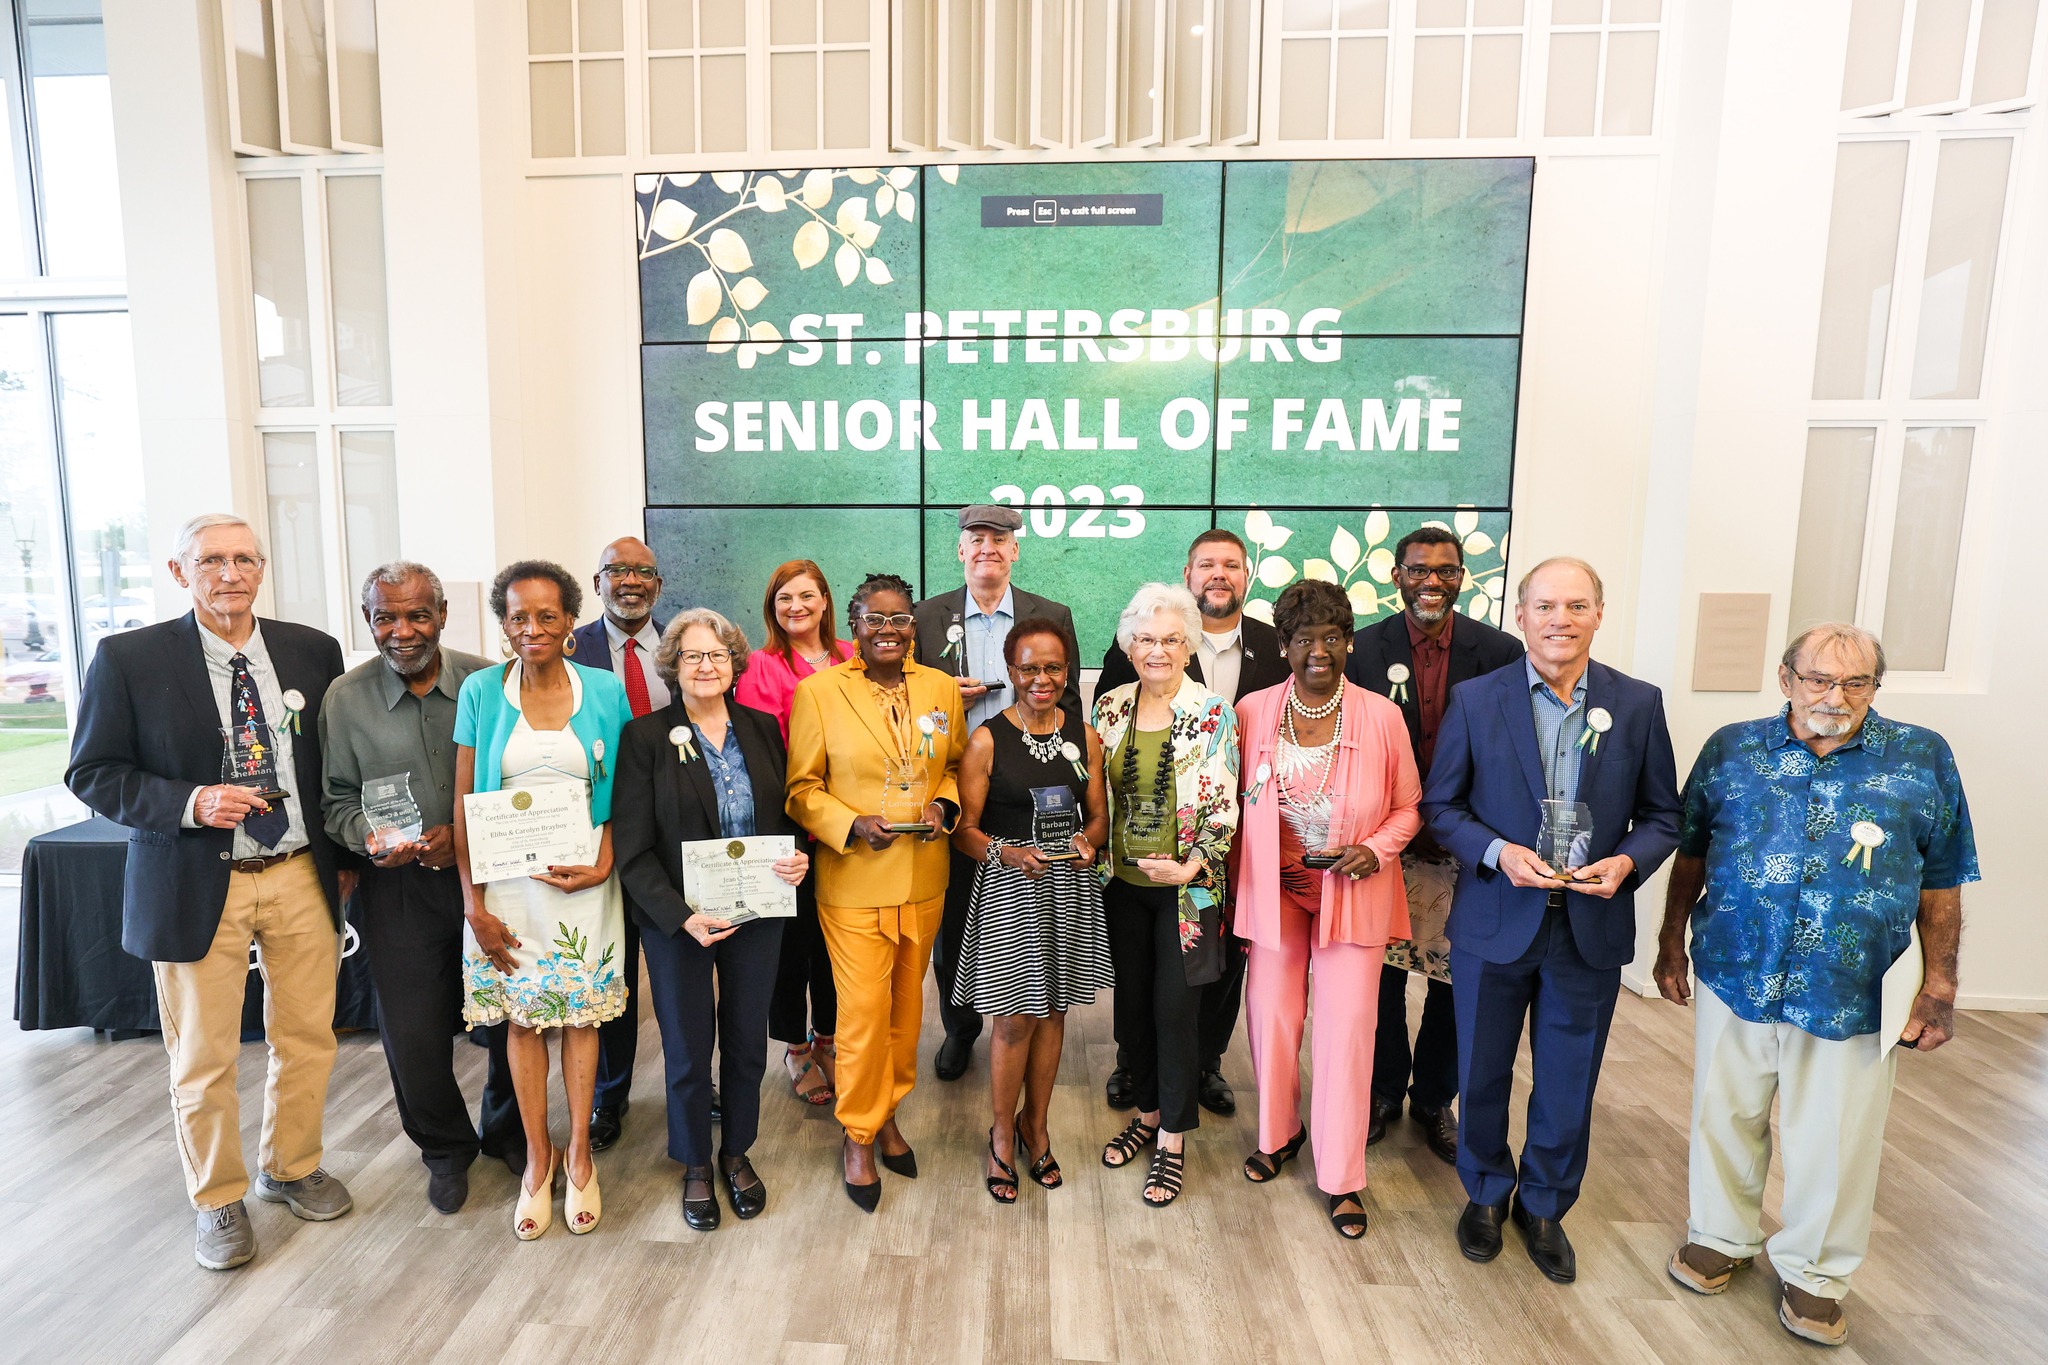 Some of the Senior Hall of Fame inductees from 2019 holding their awards